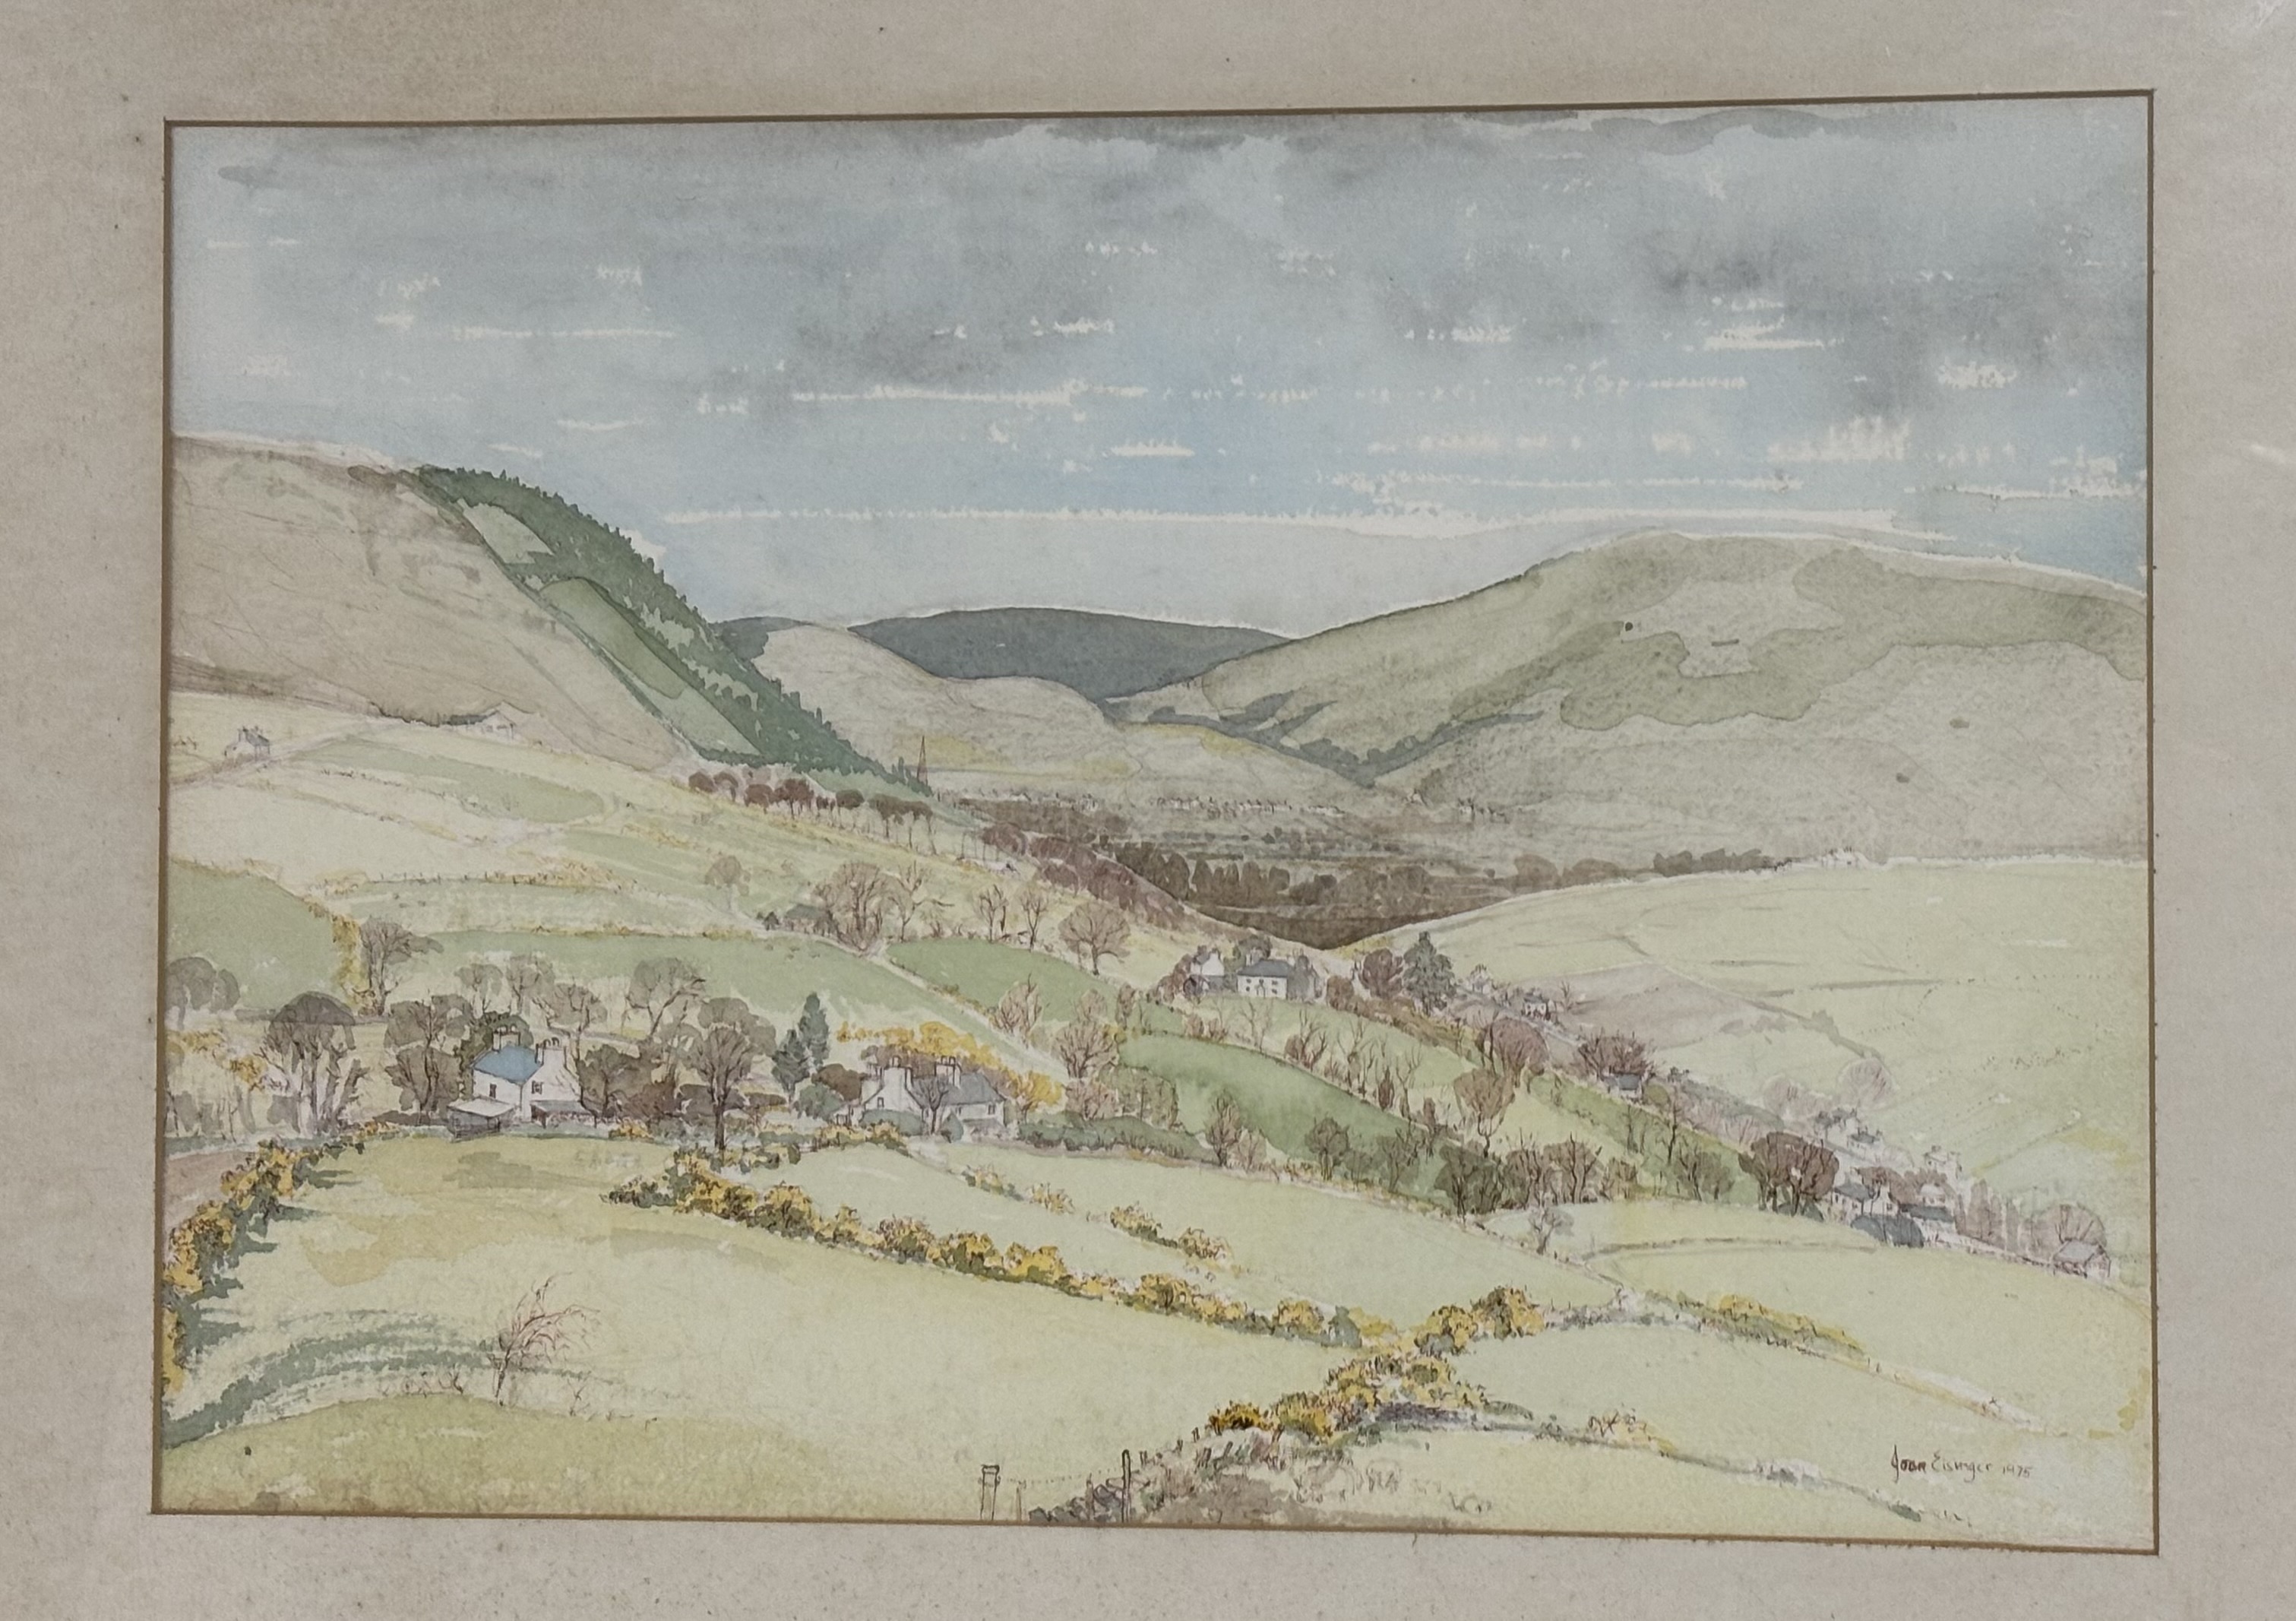 Joan M Eisinger, English countryside landscape, pen and watercolour, signed and dated 1975 bottom - Image 2 of 2